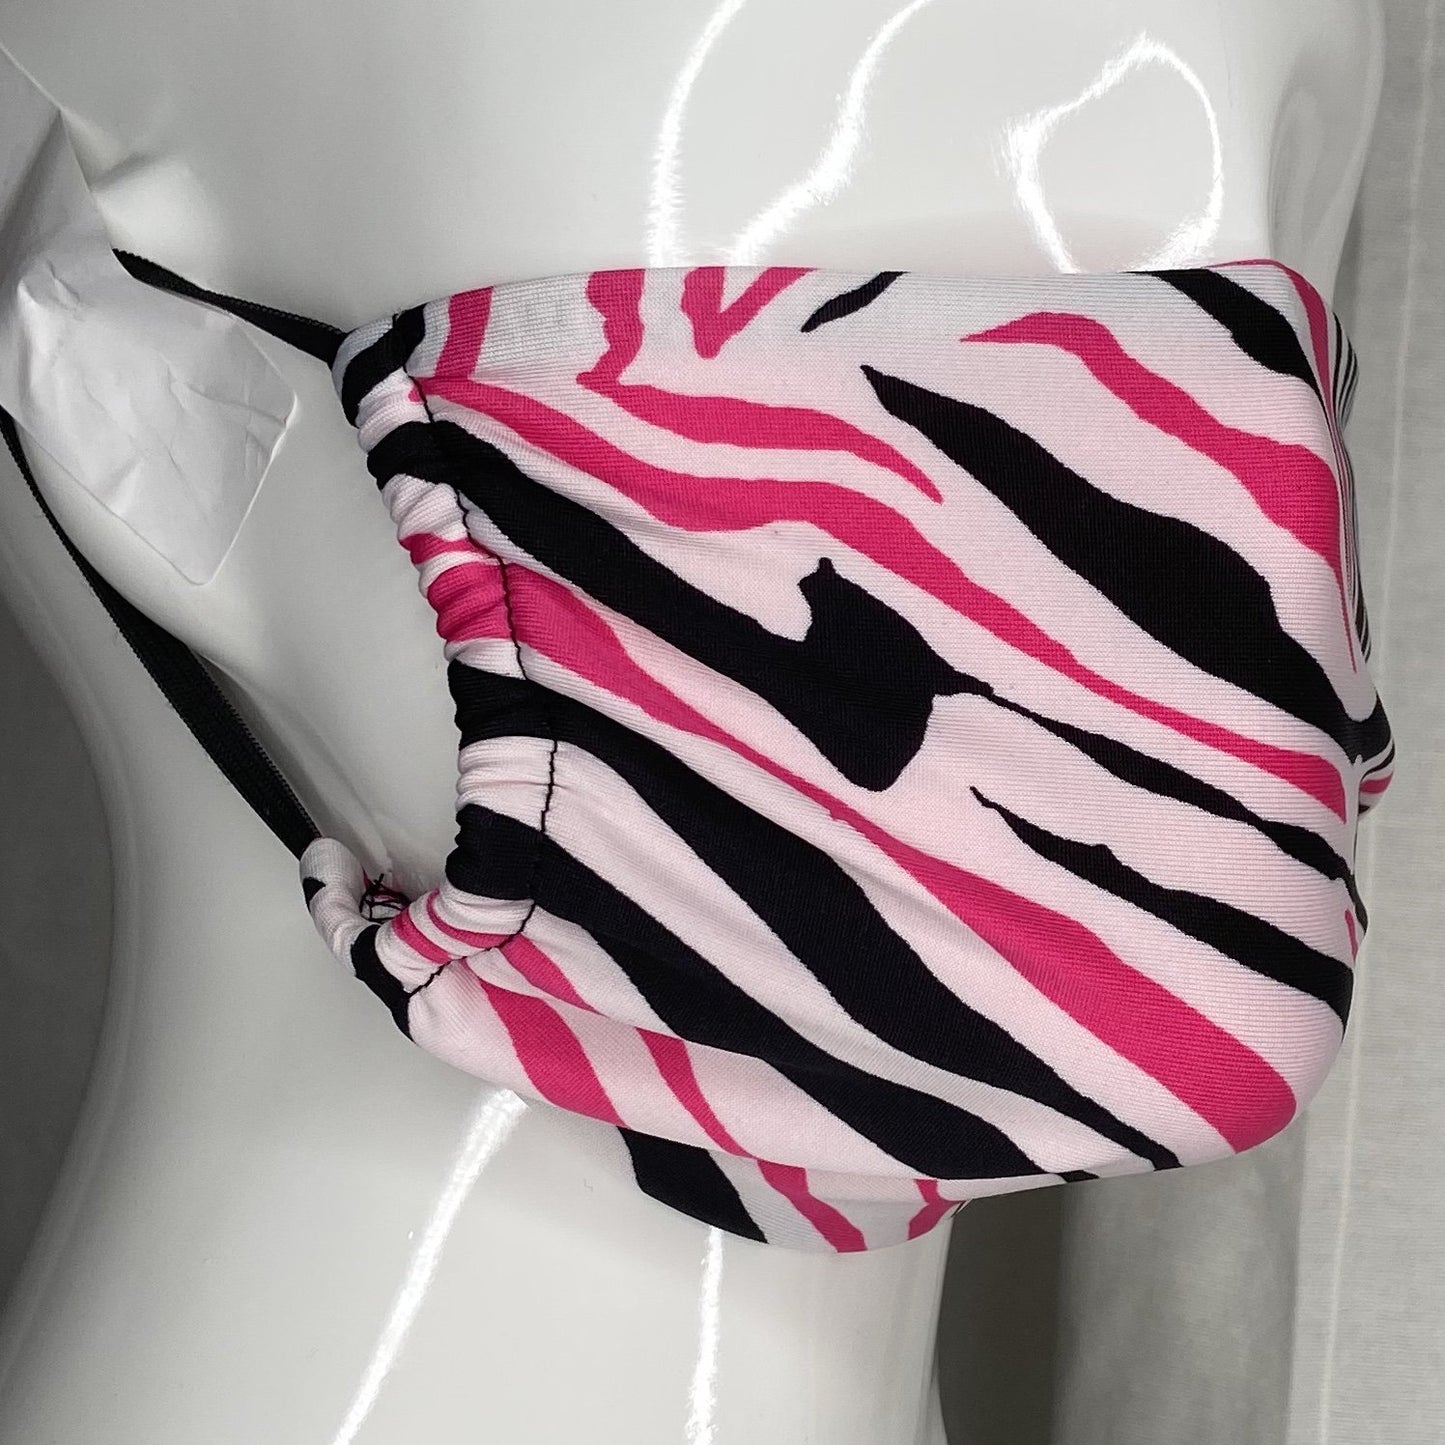 Fashion Mask (Pink/Black Zebra) In Stock-Boughie Curves-Boughie